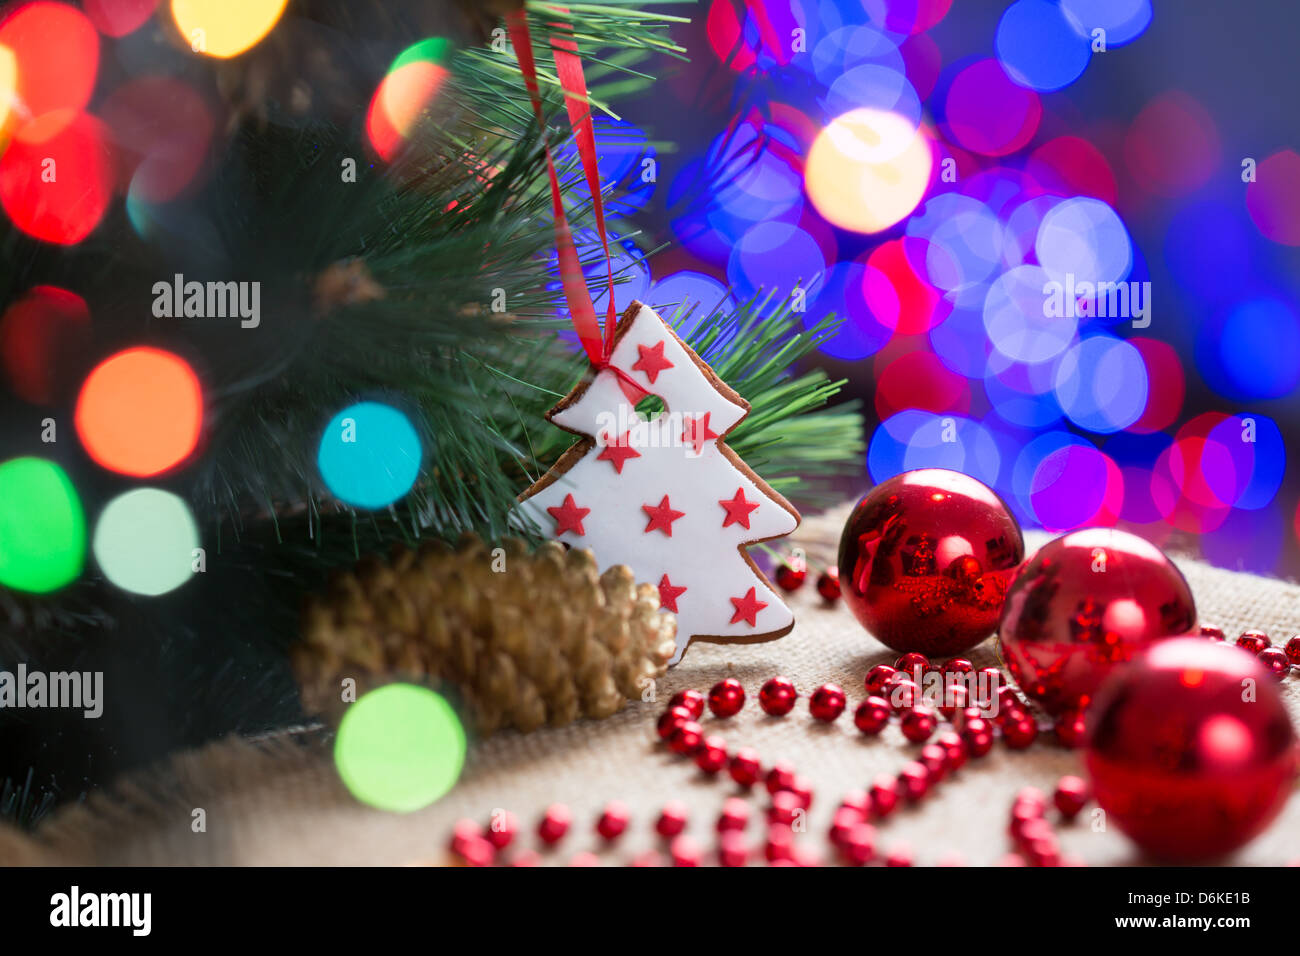 Christmas tree with bauble and cake over bright festive background Stock Photo